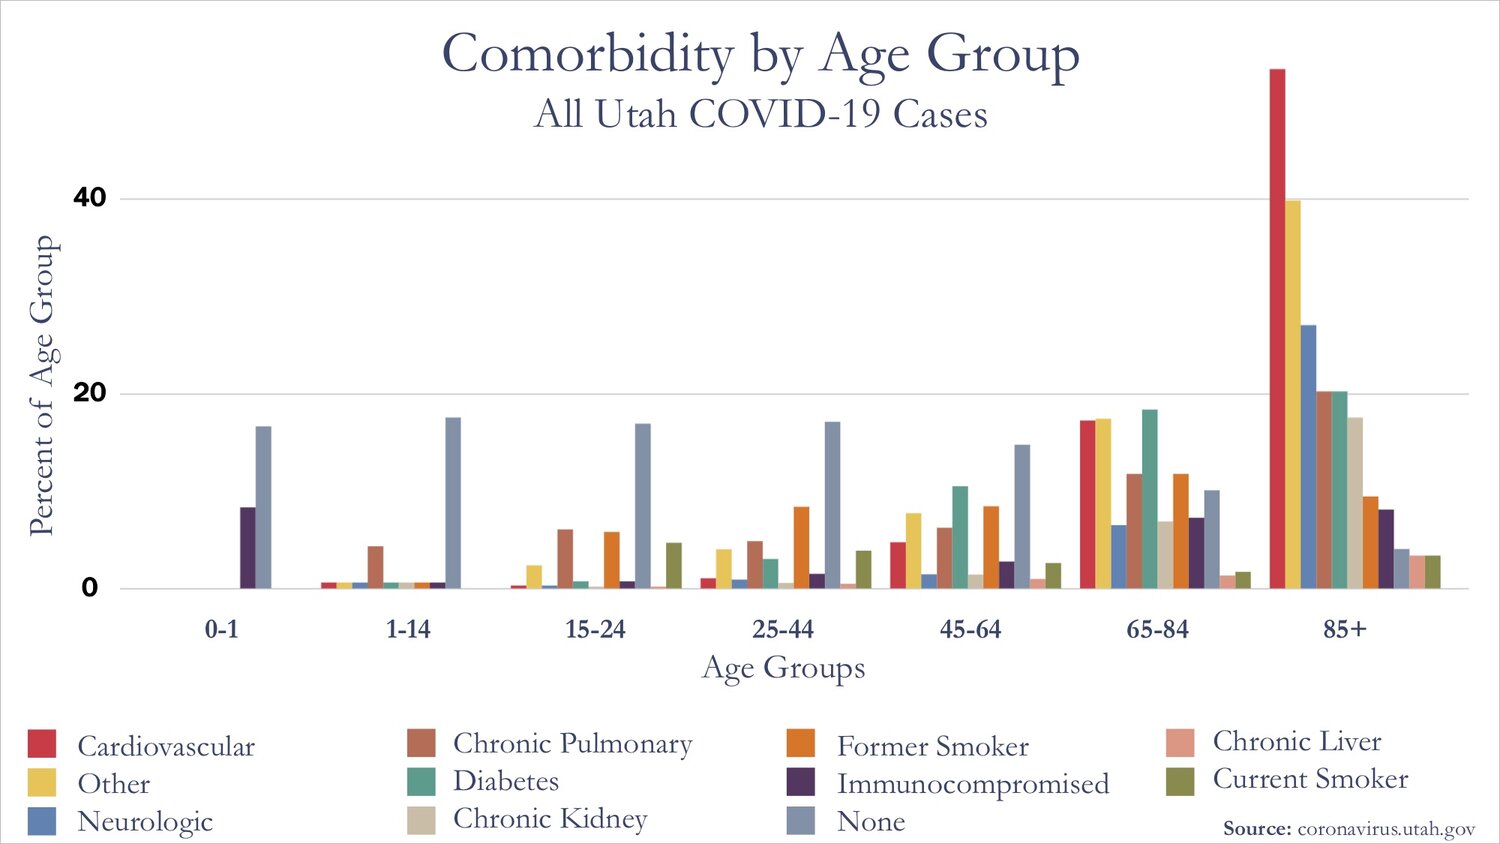 Comorbitity by Age Group